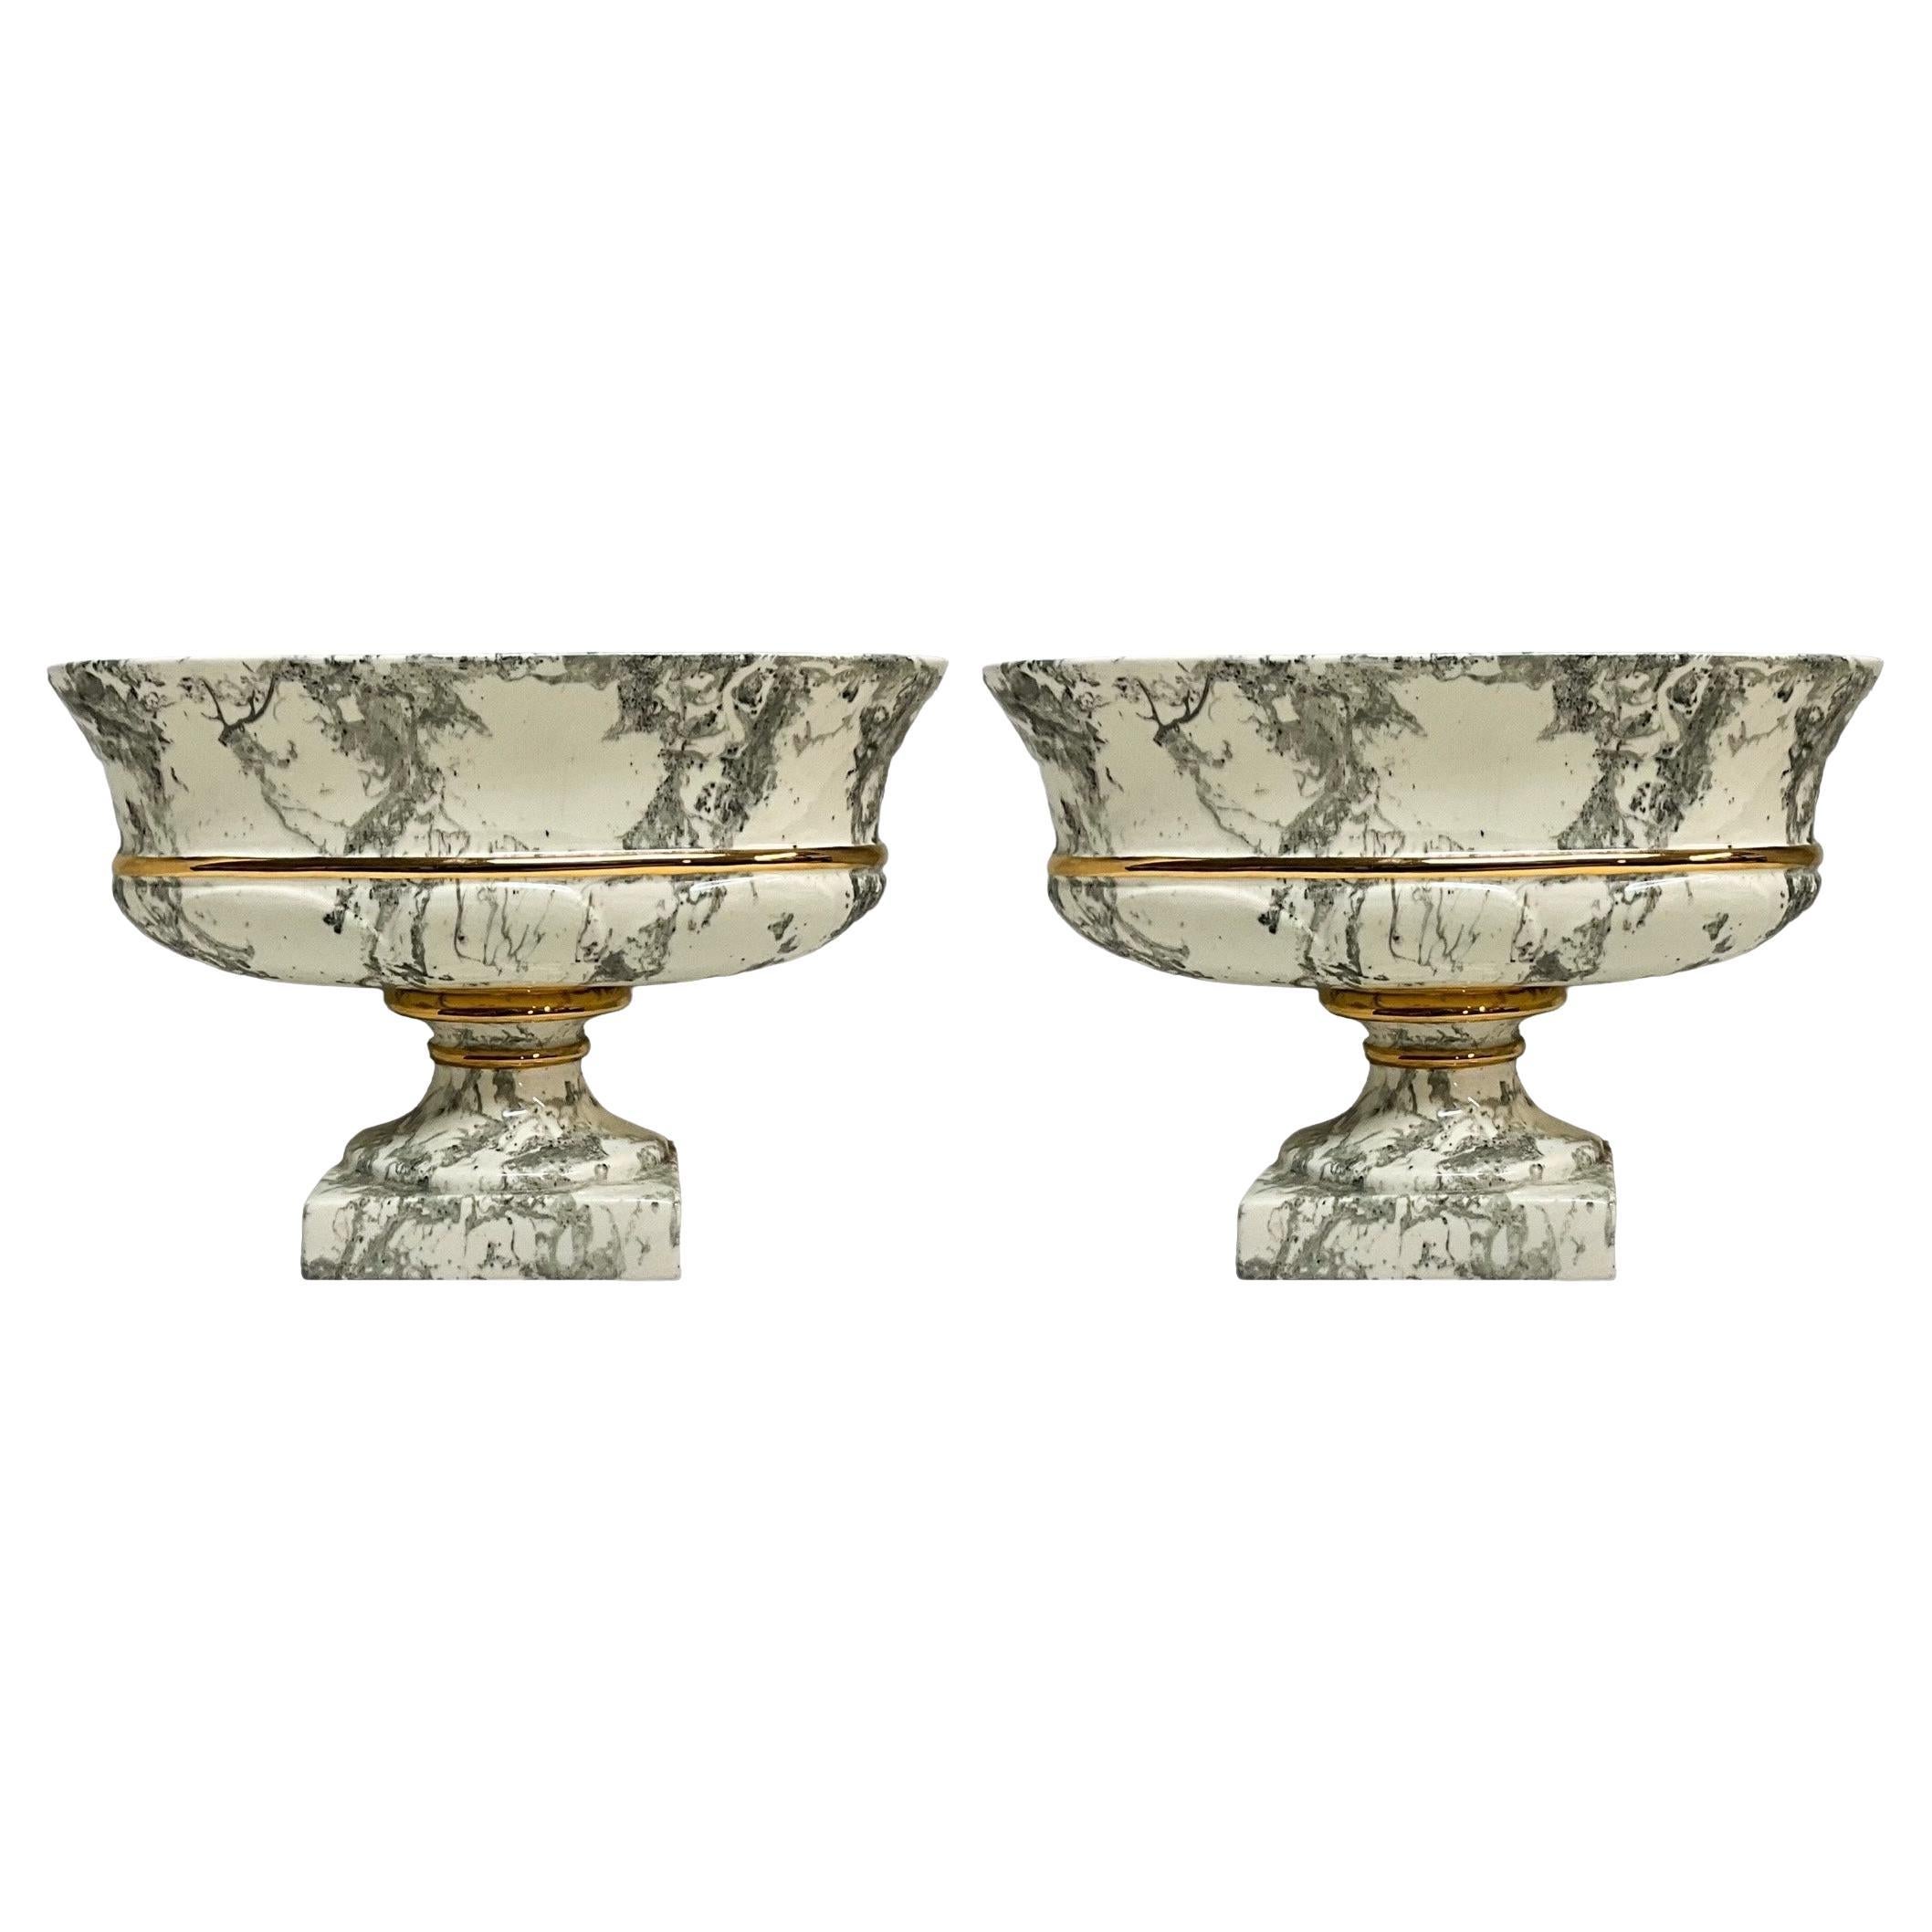 Mid-Century Neo-Classical Style Faux Marbleized Mantel Planters / Cachepot - S/2